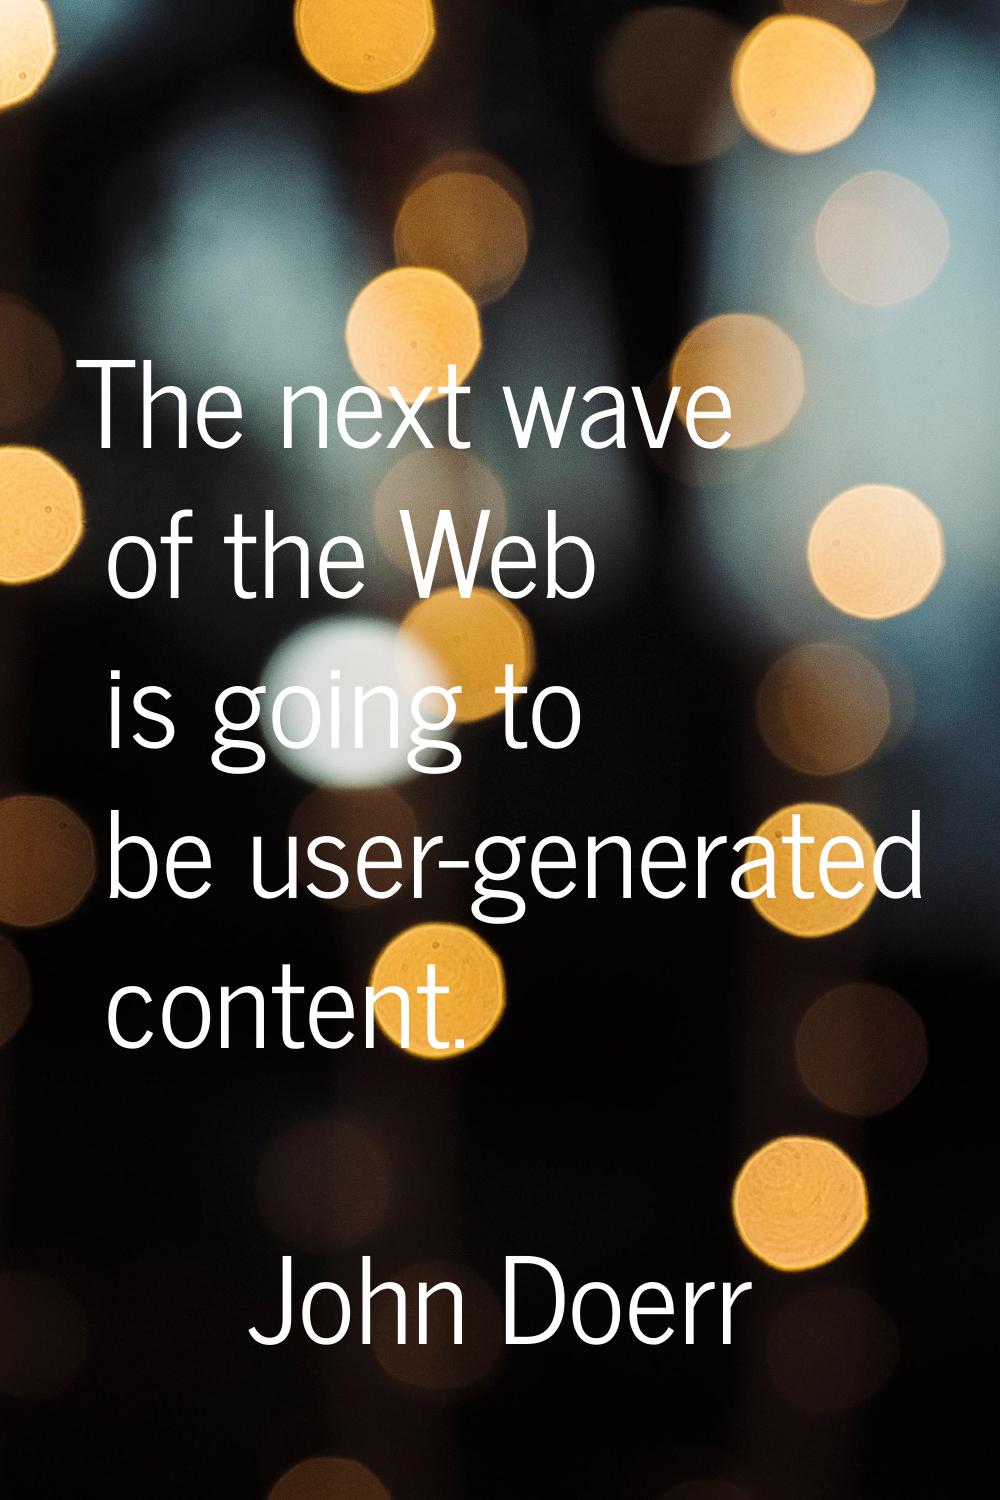 The next wave of the Web is going to be user-generated content.